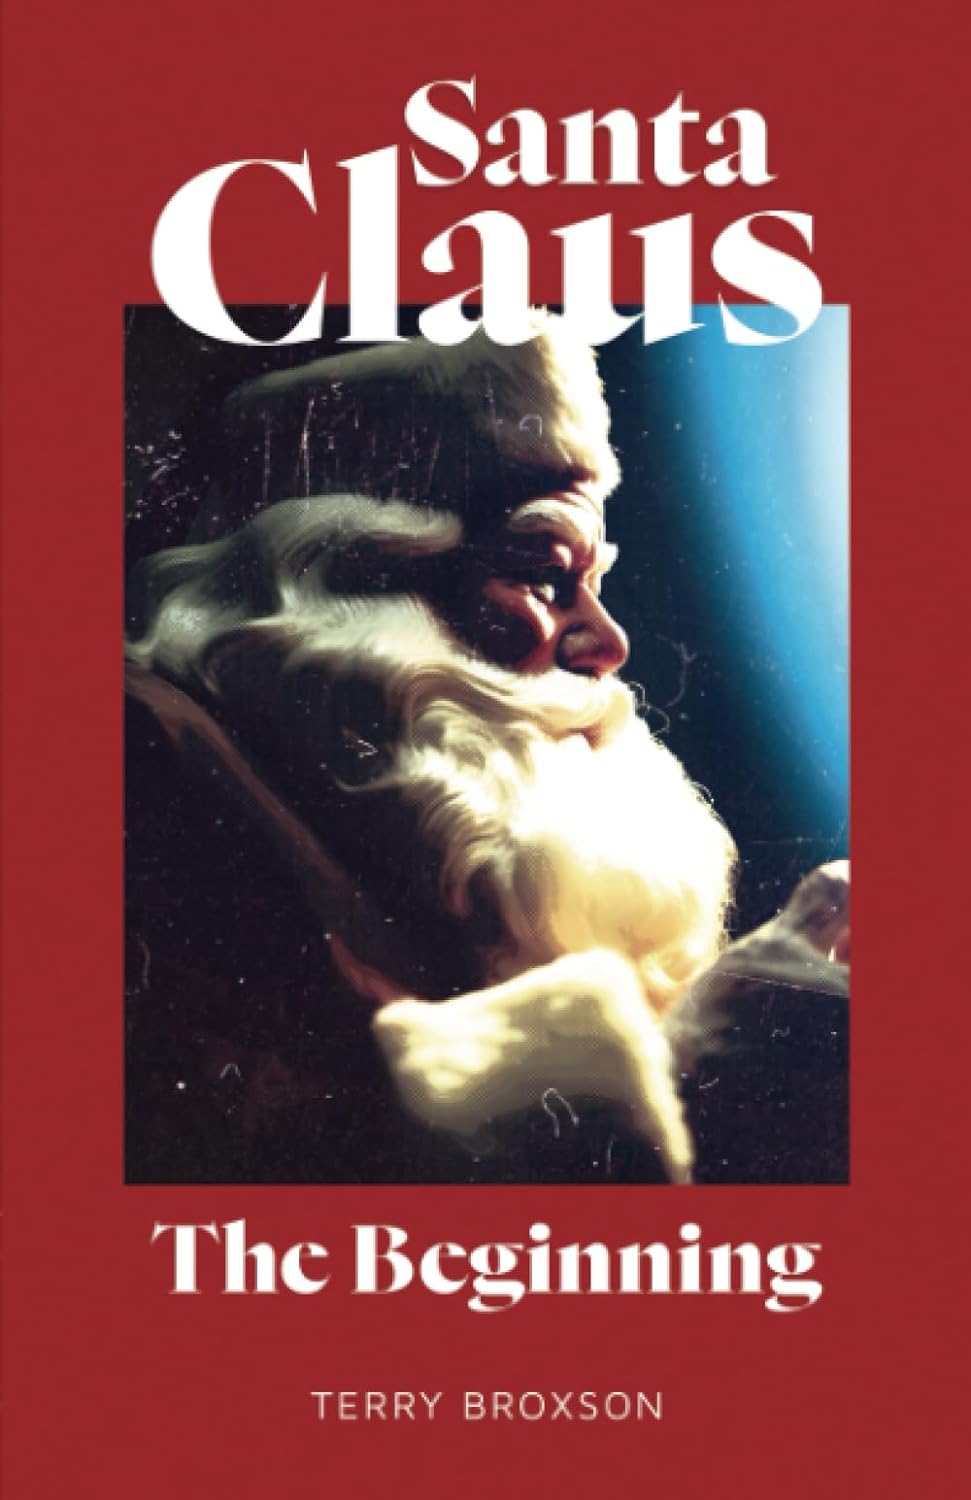 Book Review: Santa Claus: The Beginning by Terry Broxson